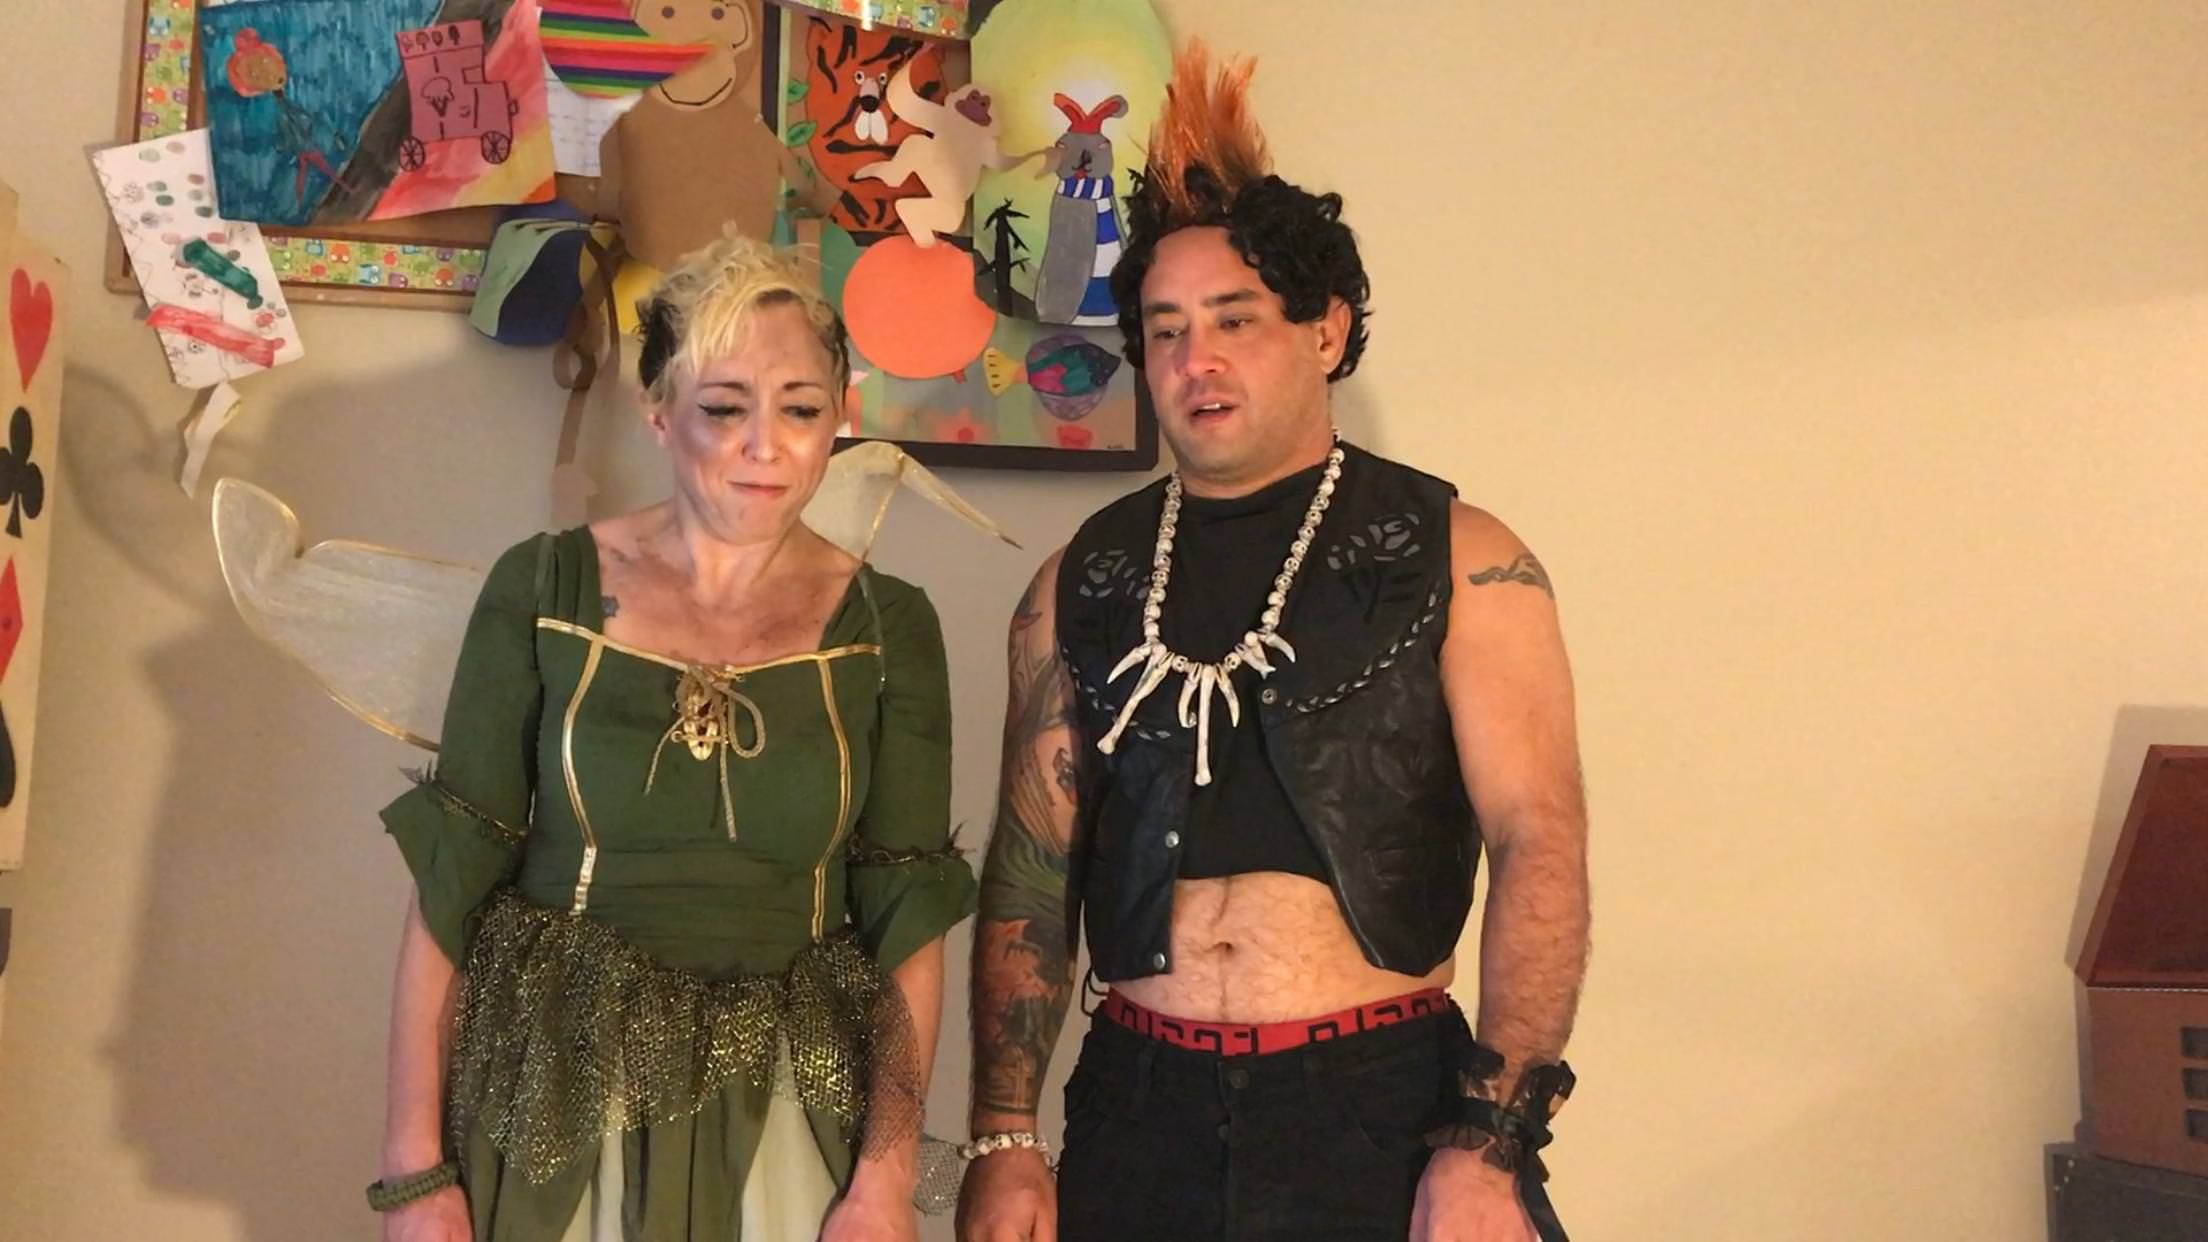 For Halloween my wife and I dressed up as Tinker Bell and Rufio from Hook 26 years later